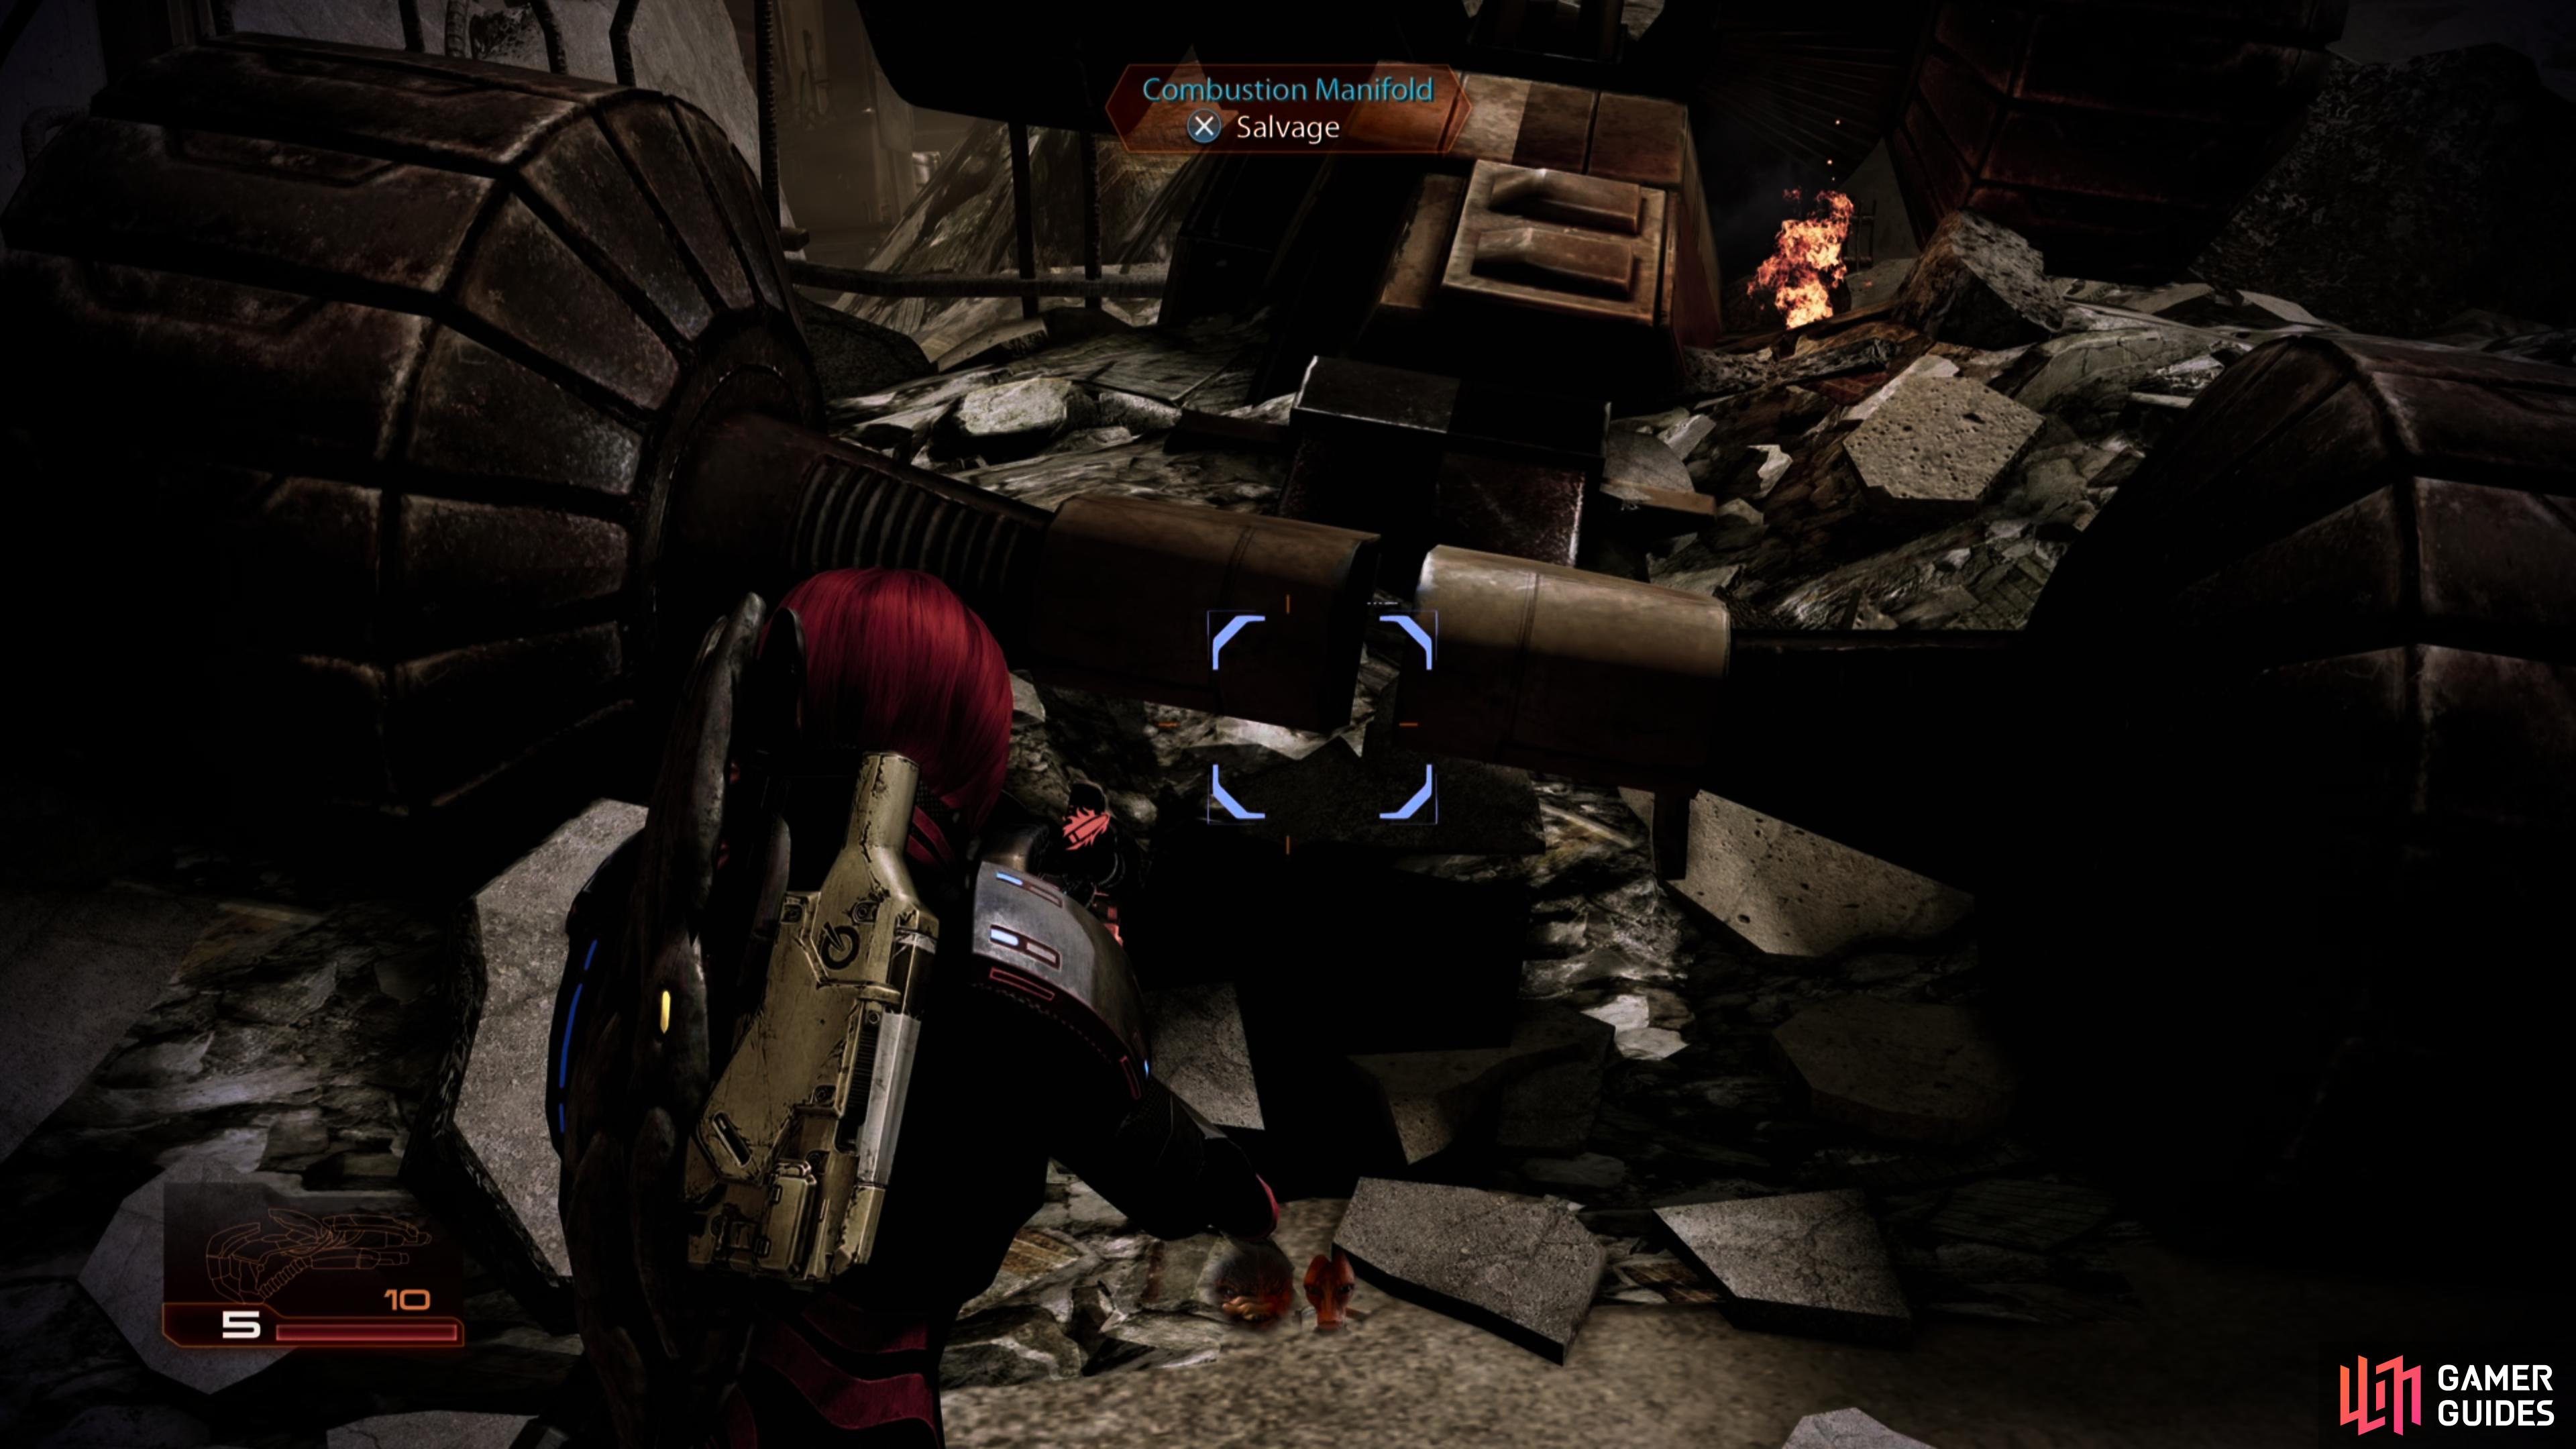 ADuring Mordin's loyalty mission, search a ruined vehicle to find a Combustion Manifold.